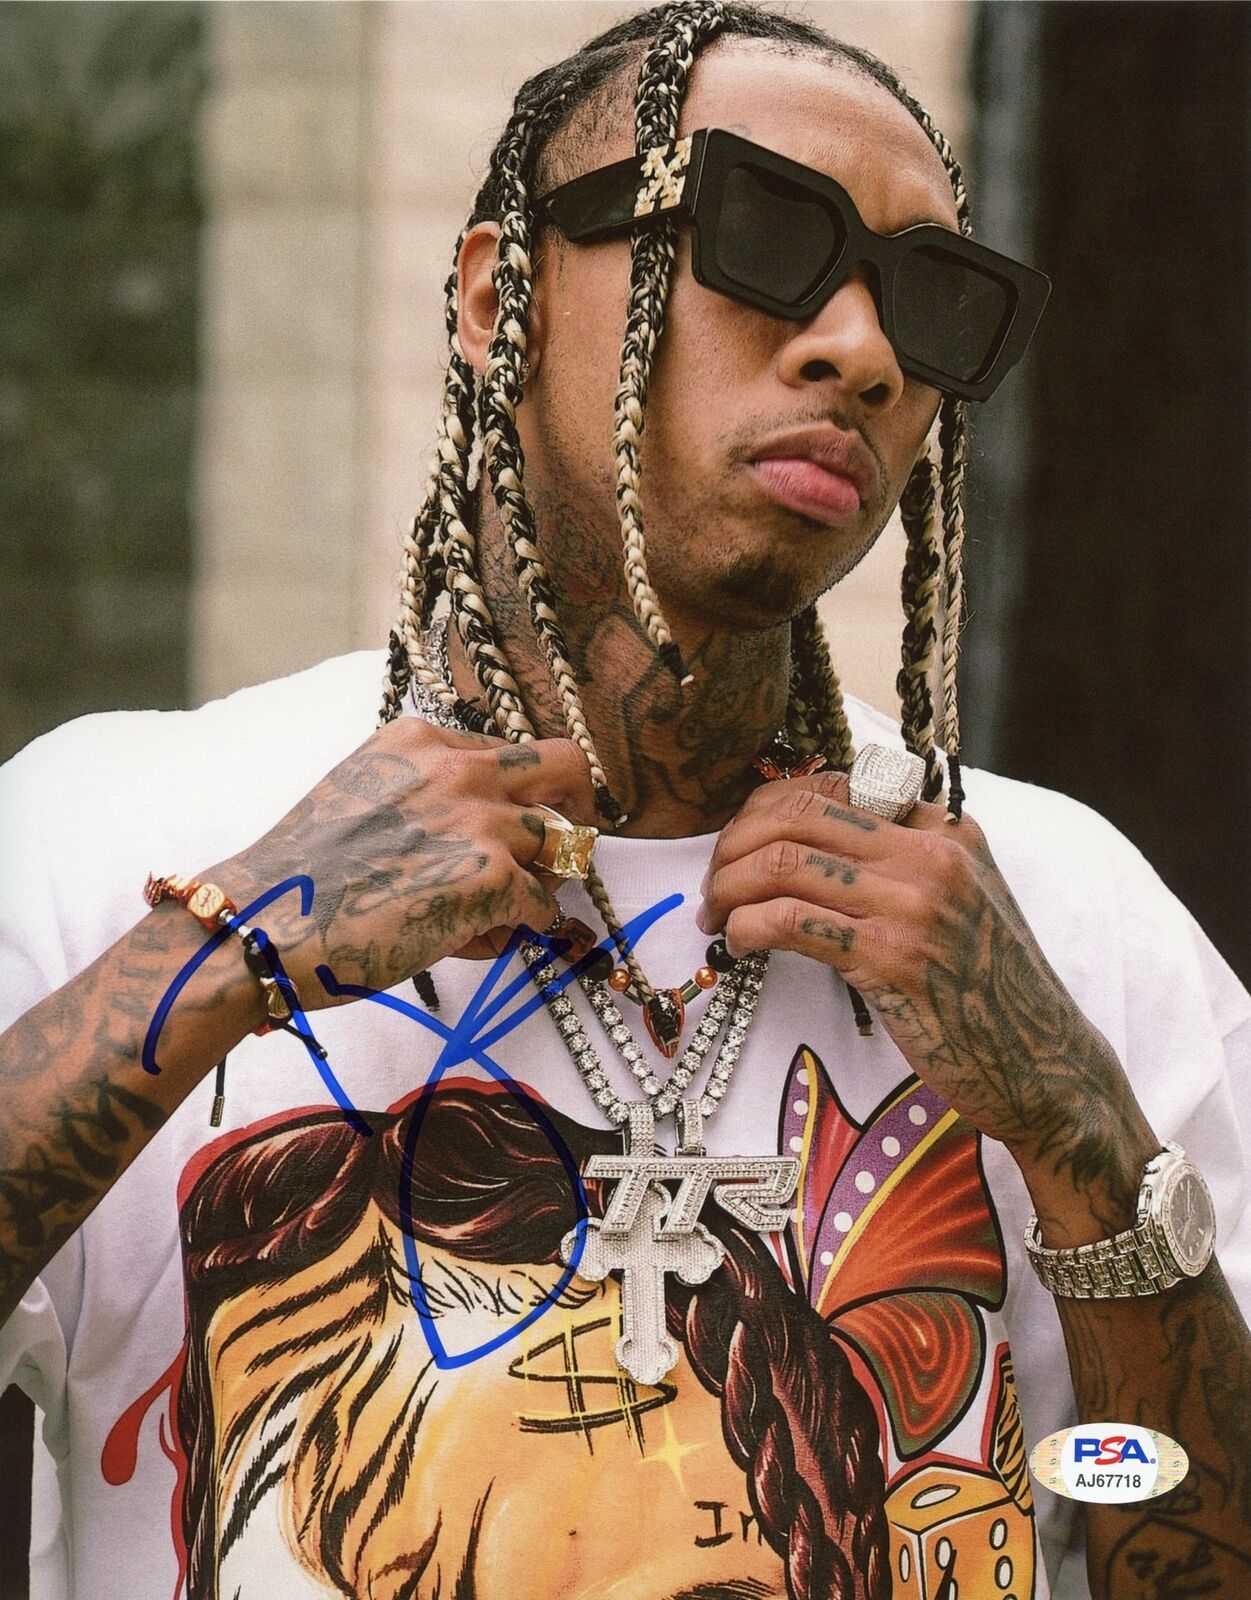 Tyga Signed Autographed 8x10 Photo Poster painting PSA/DNA Authenticated